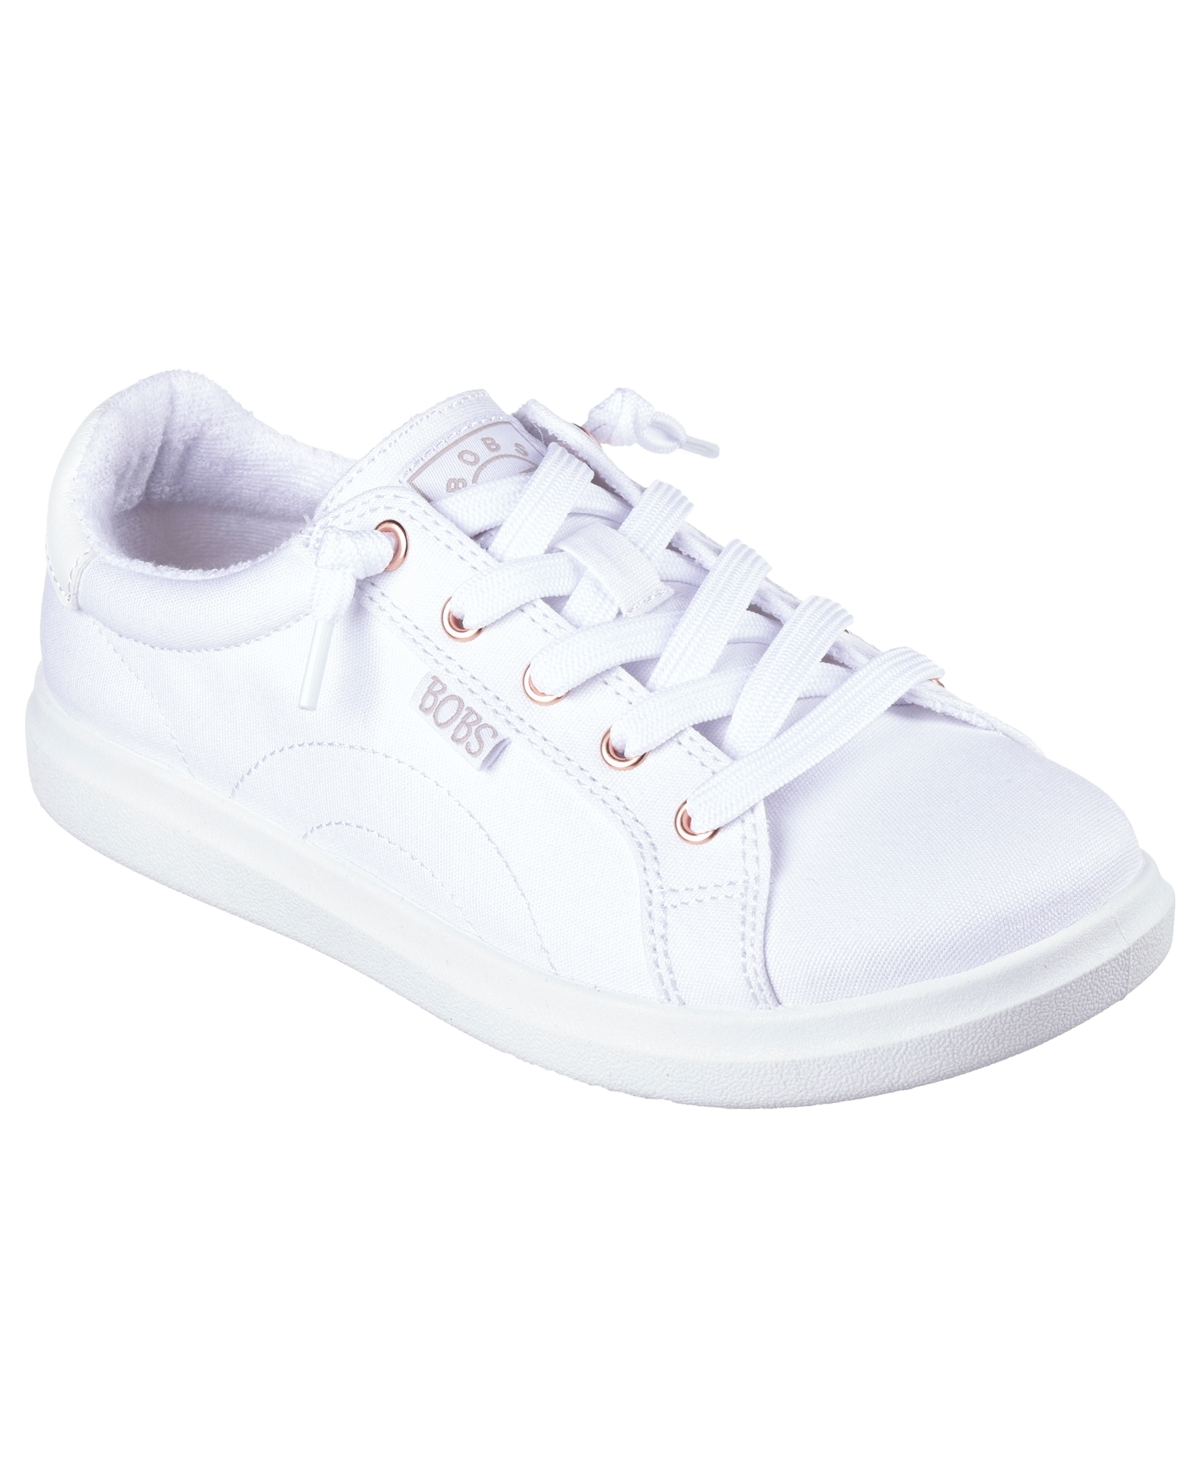 Women's Bobs - D Vine Casual Sneakers from Finish Line - White